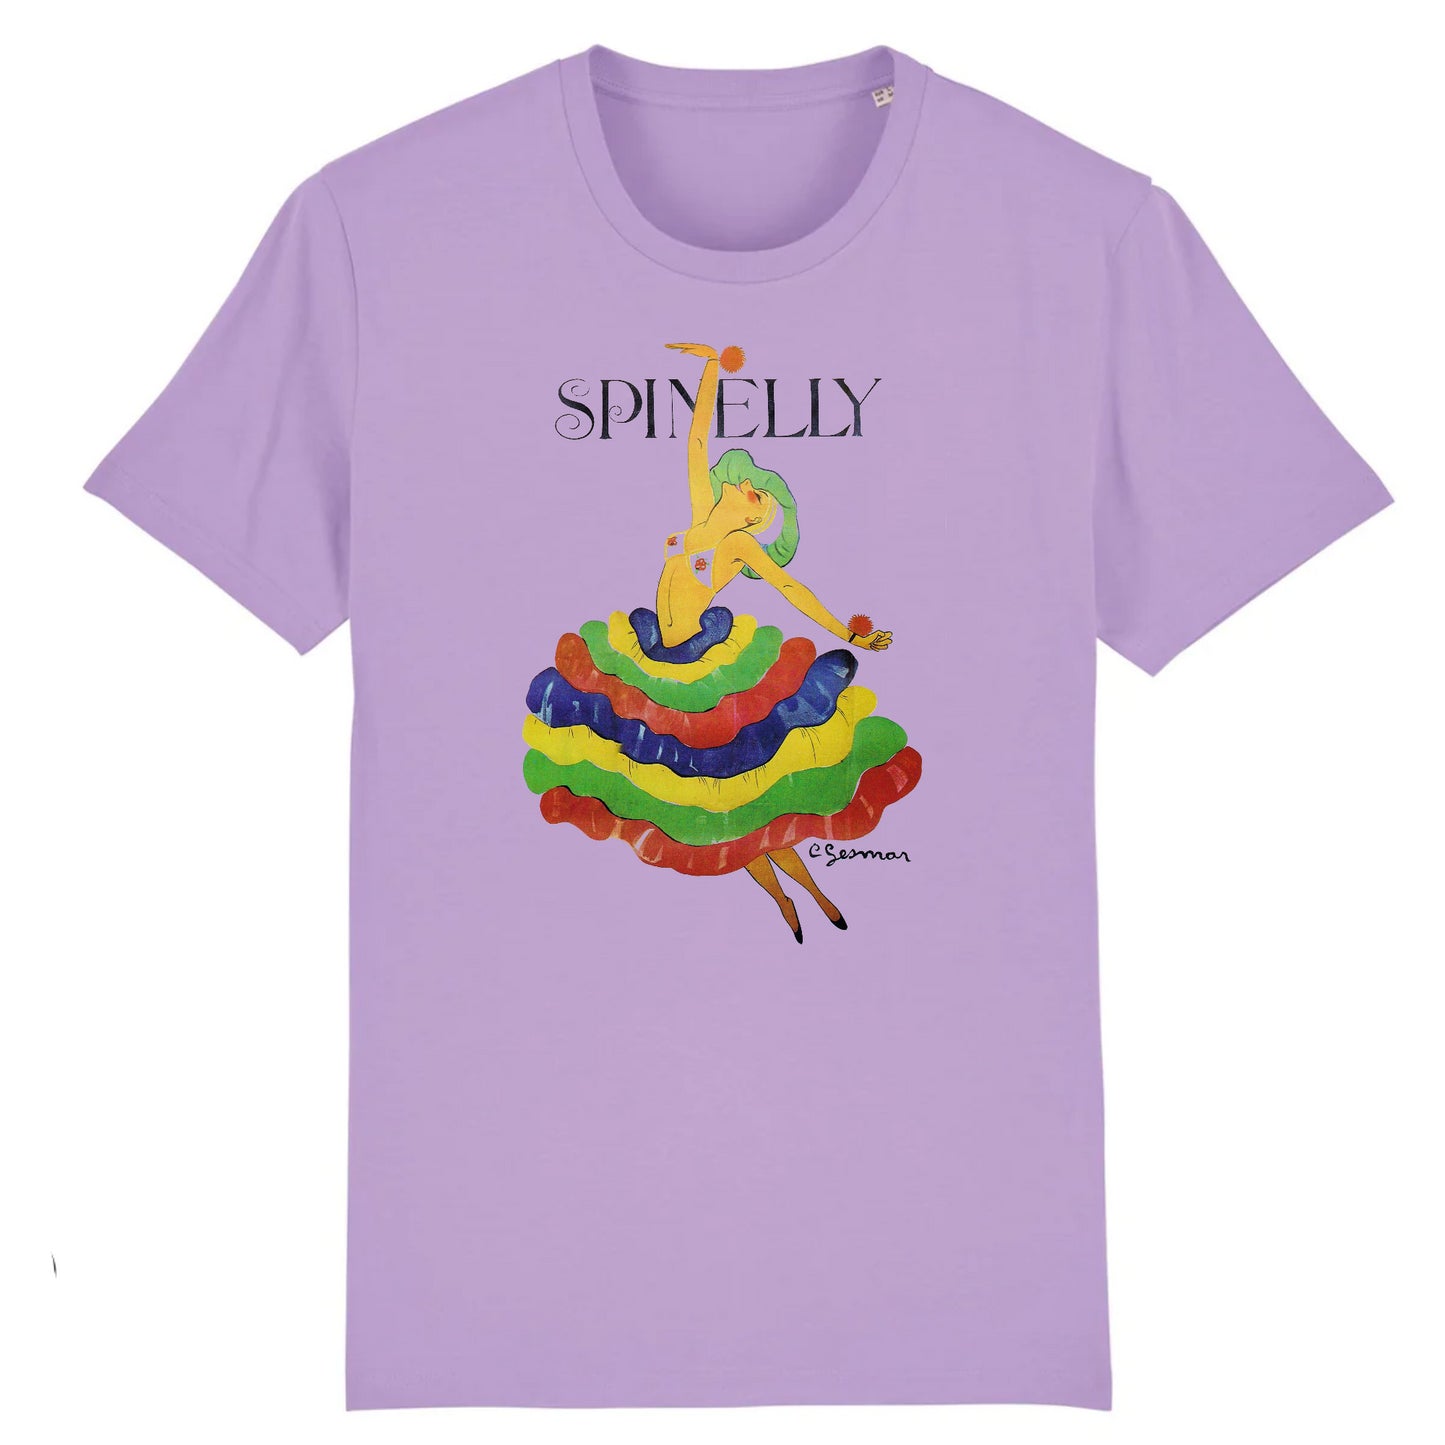 Spinelly by Charles Gesmar, 1919 - Organic Cotton T-Shirt